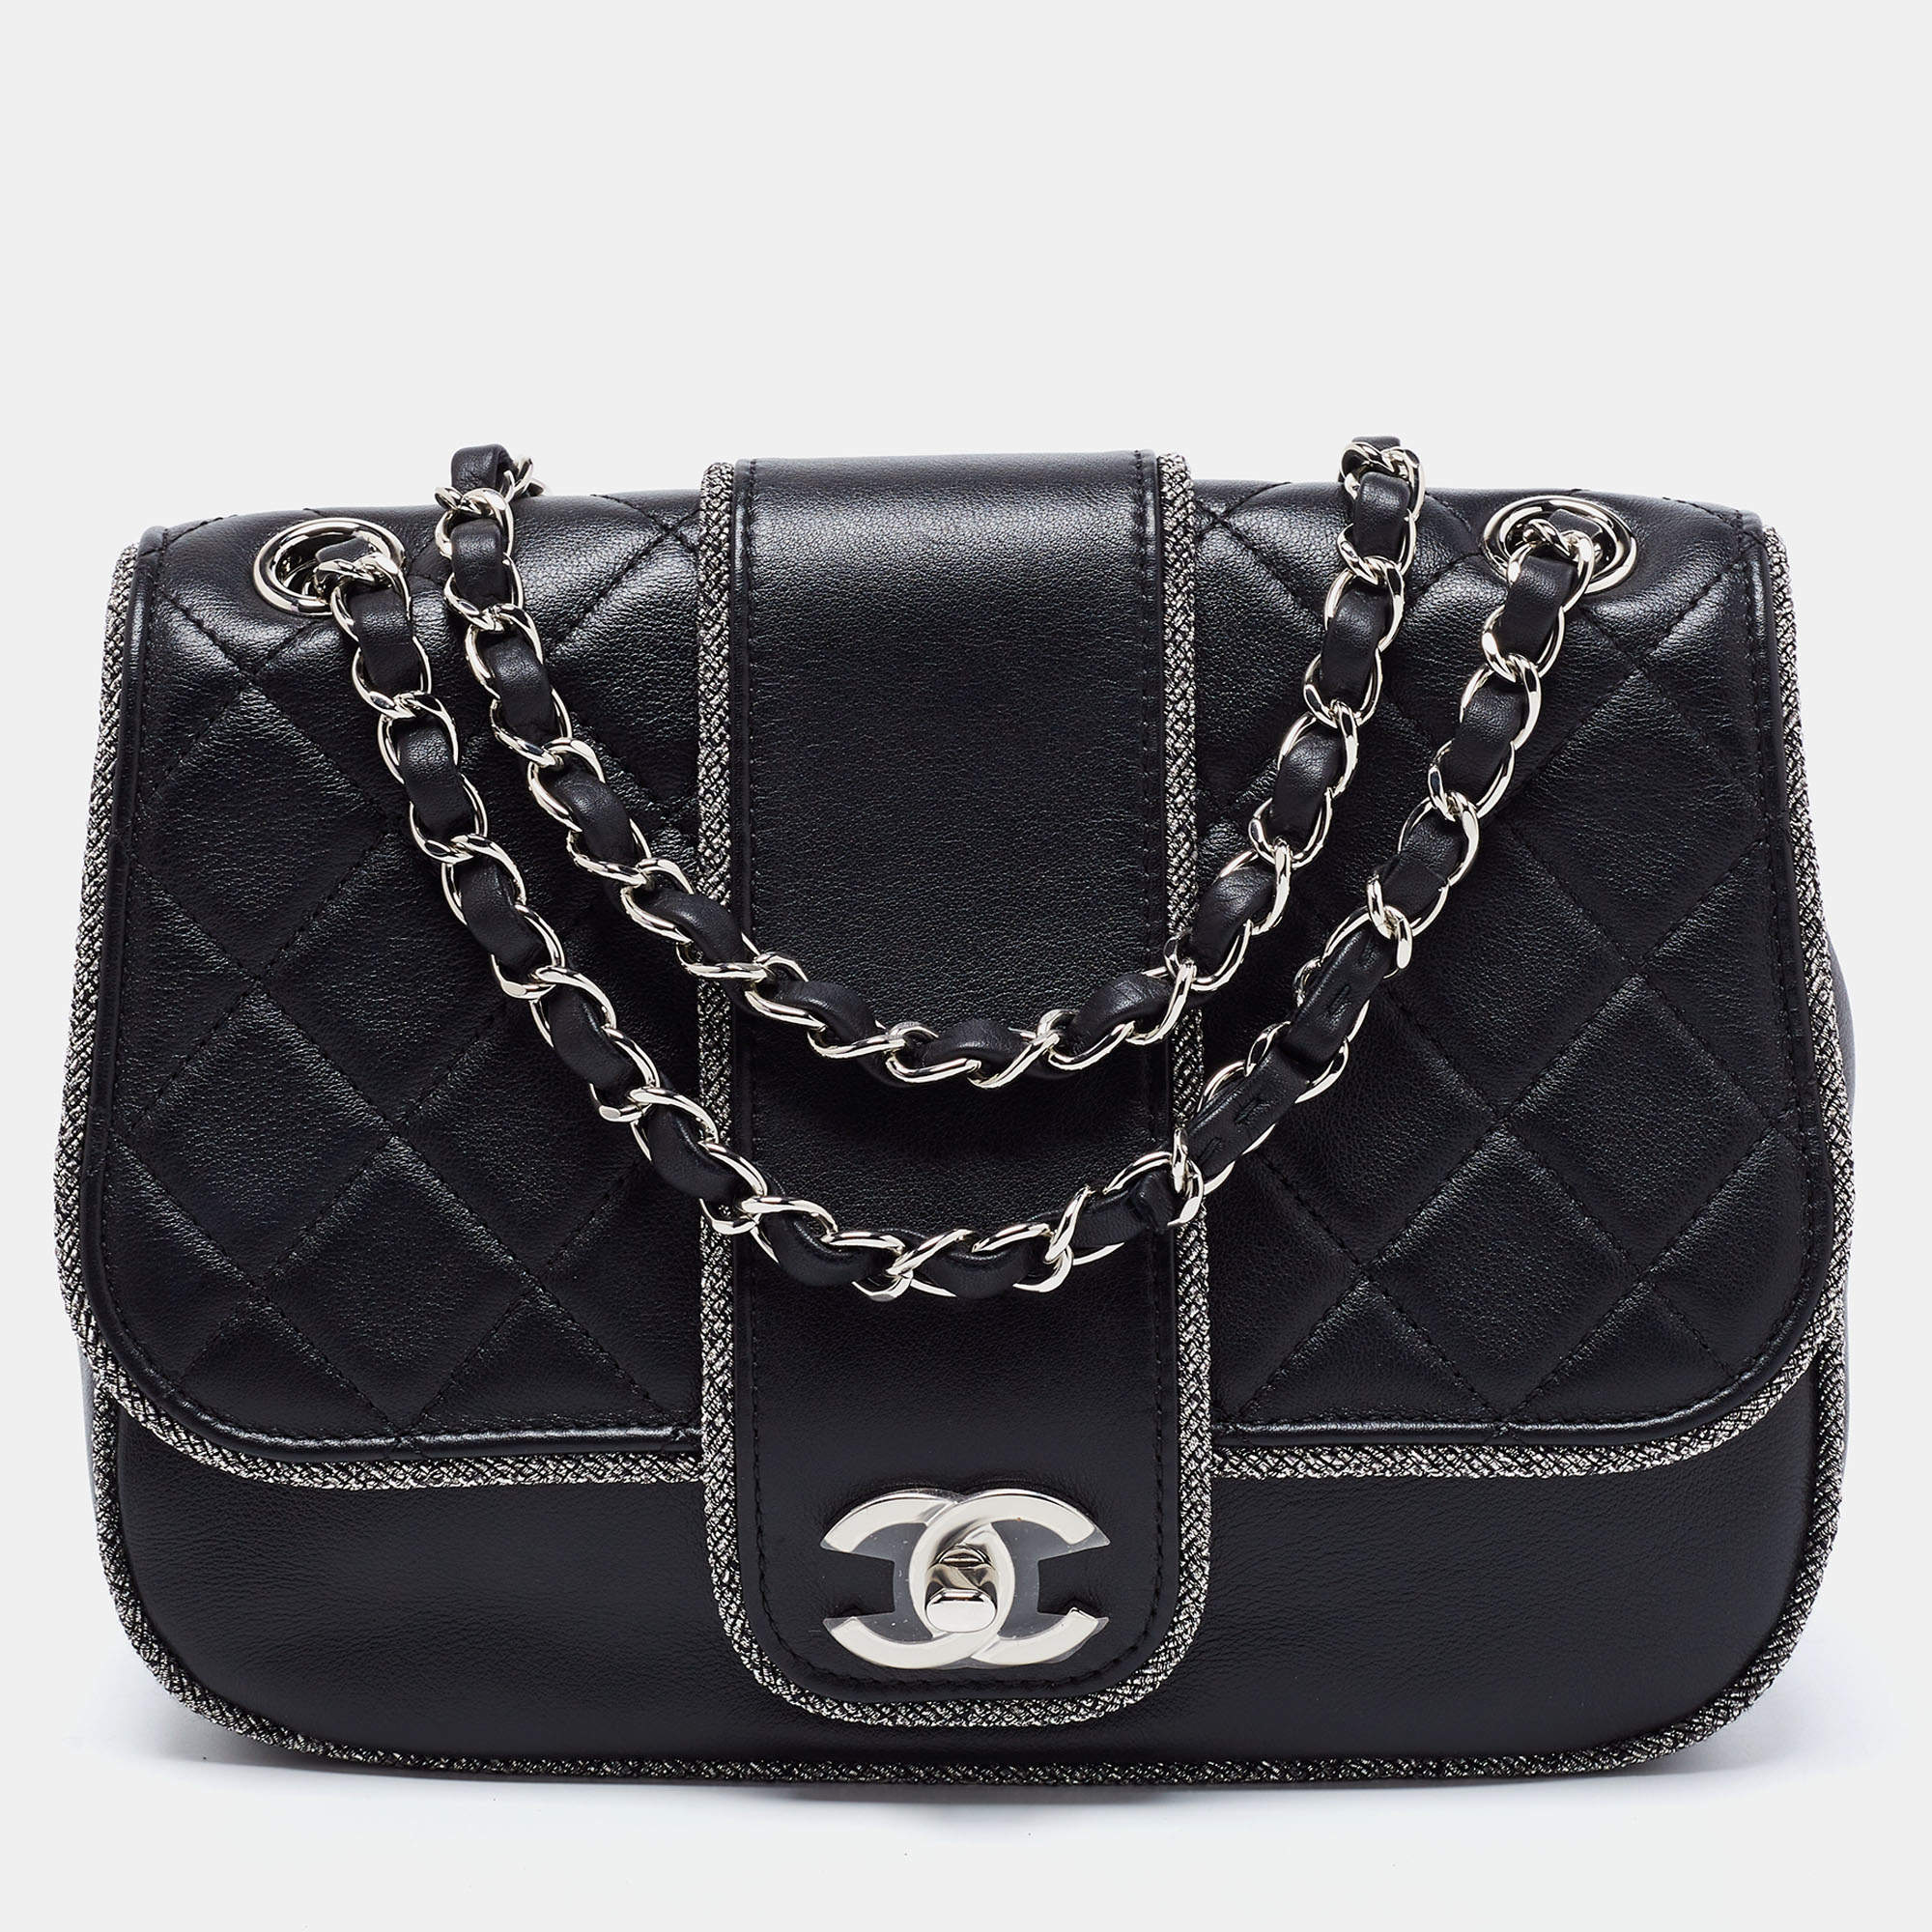 Chanel Black Quilted Leather and Lurex Elementary Chic Flap Bag